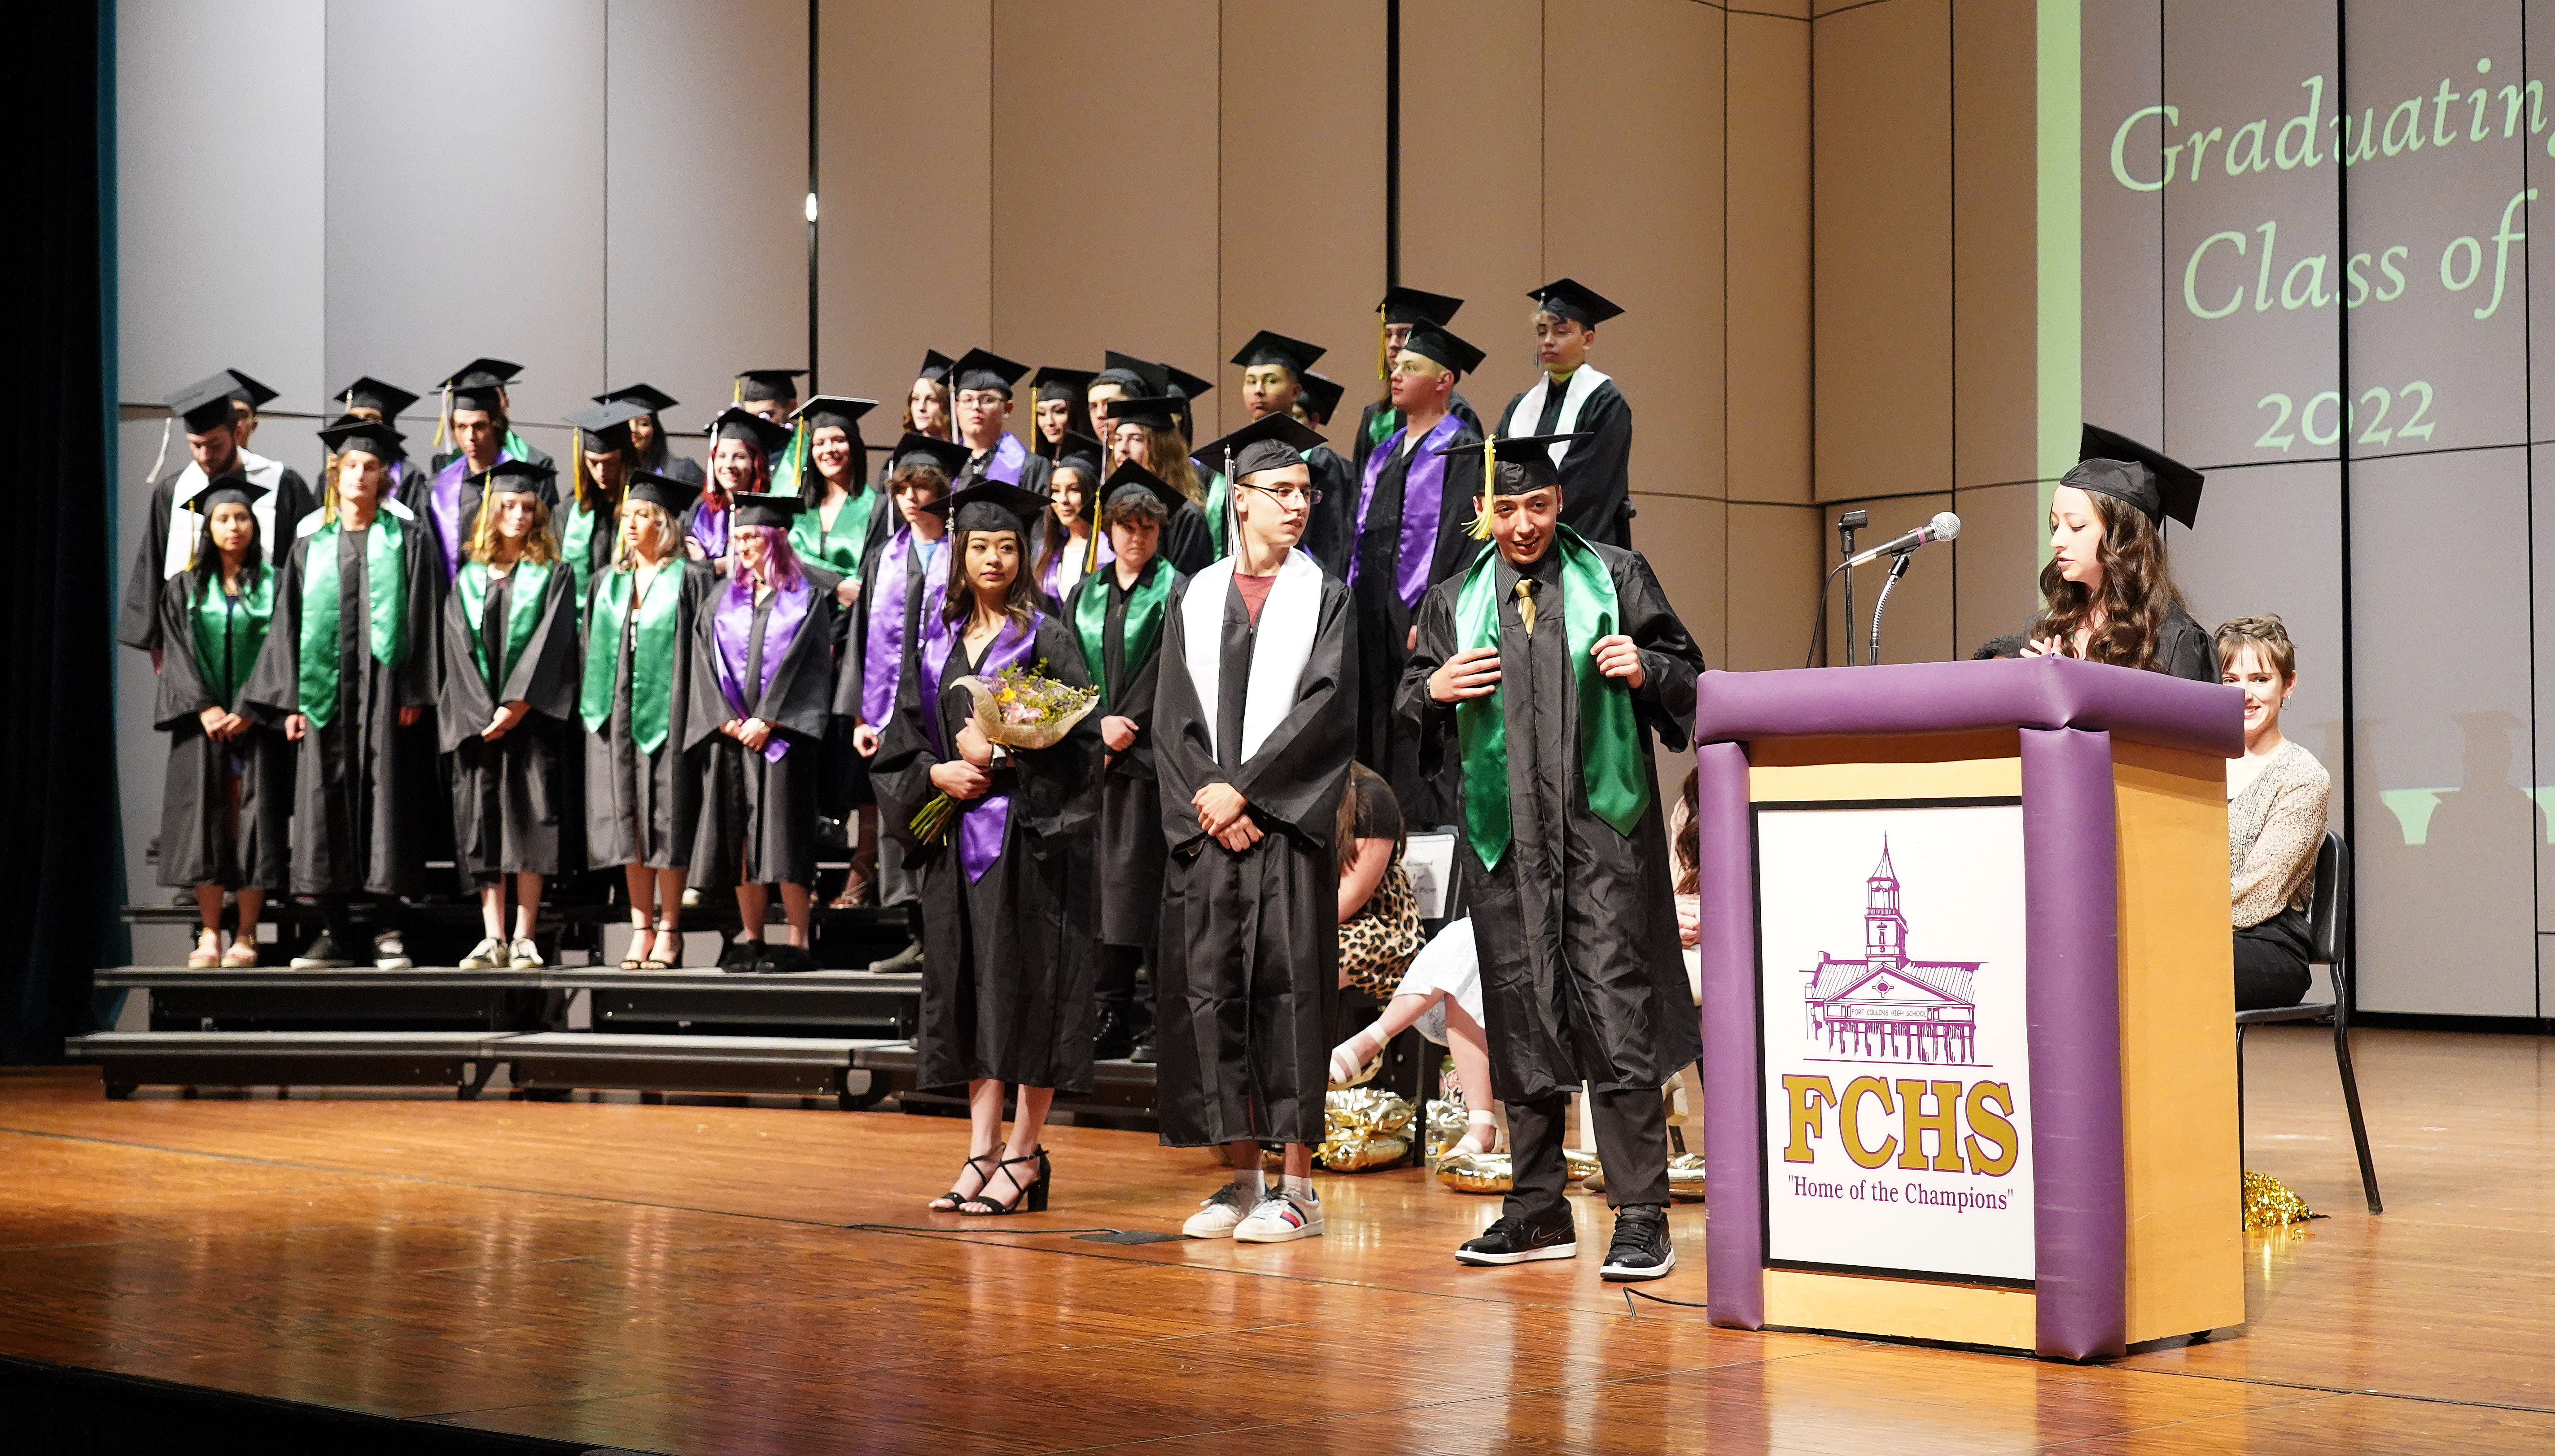 All graduates are standing on the stage. 